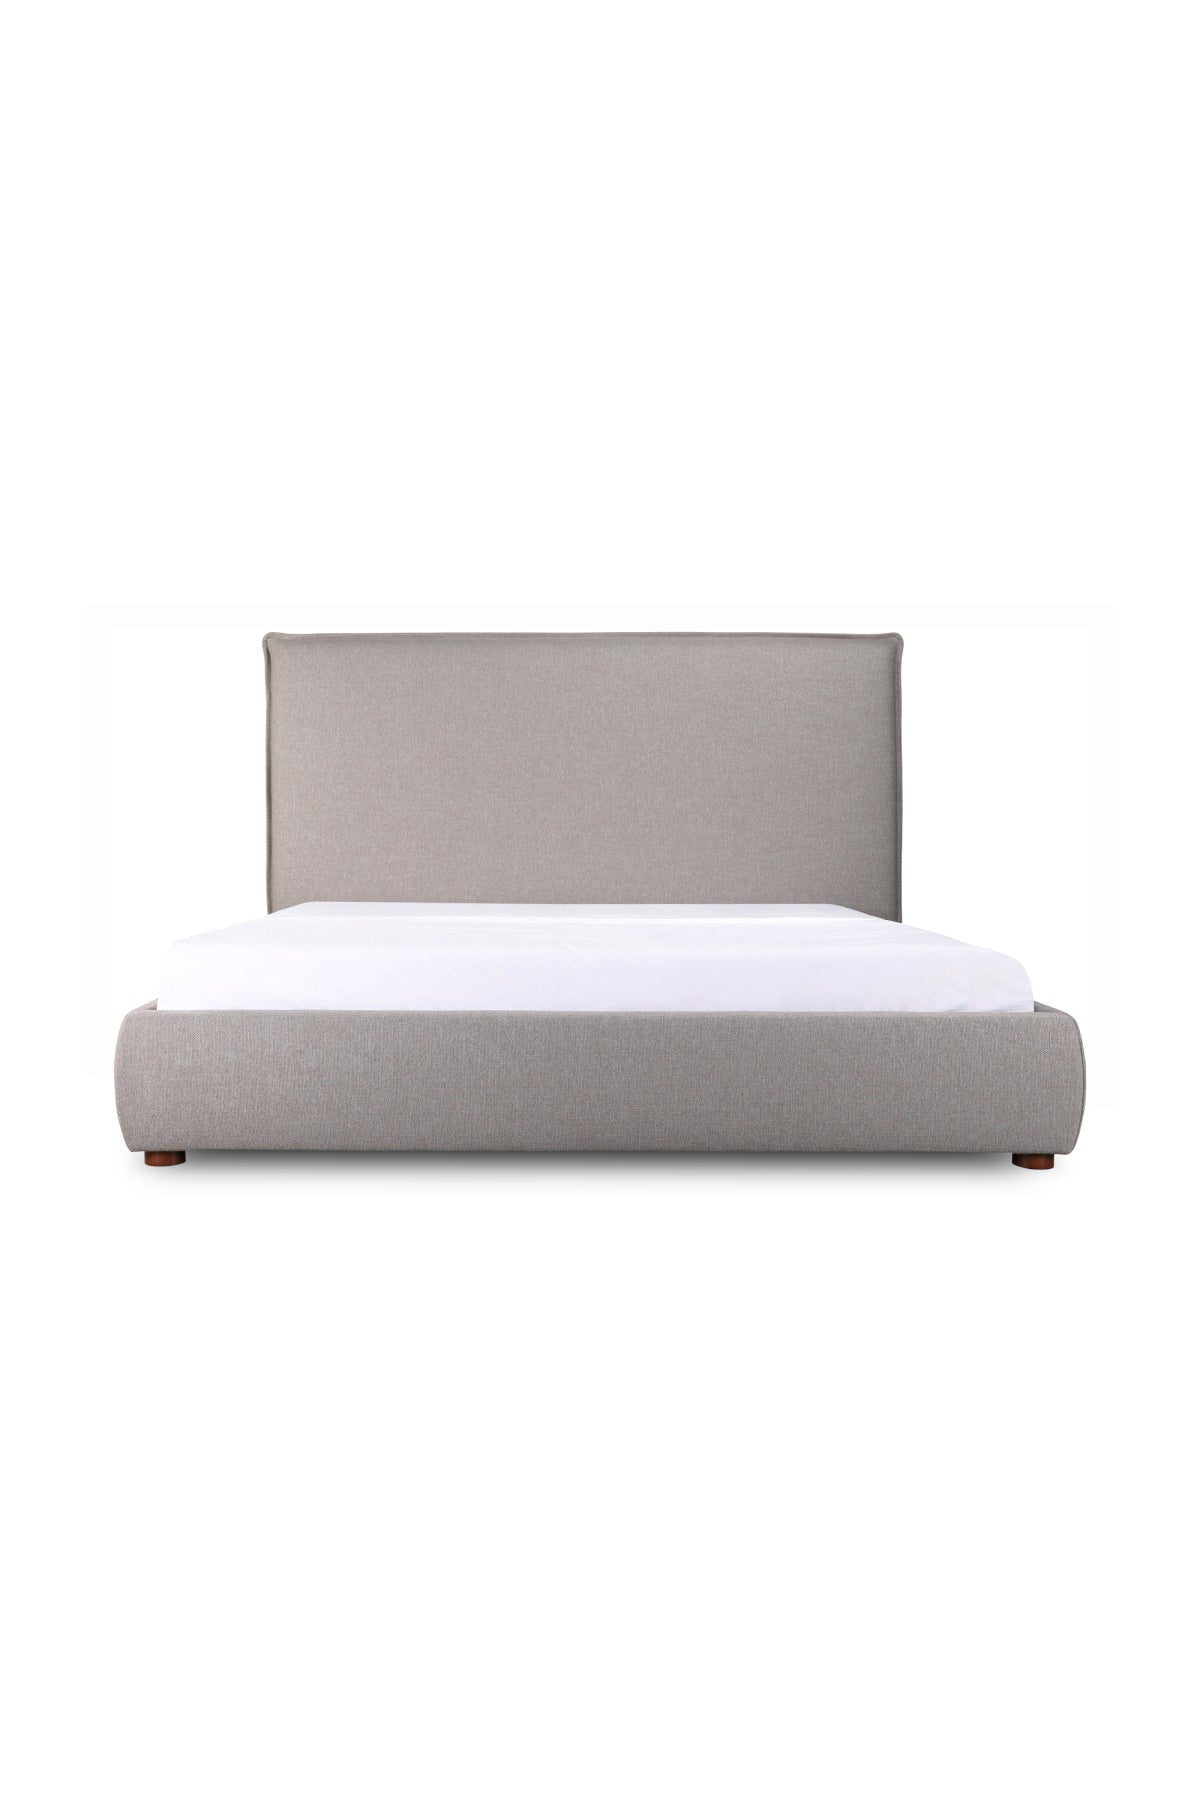 Library Upholstered Bed - Greystone